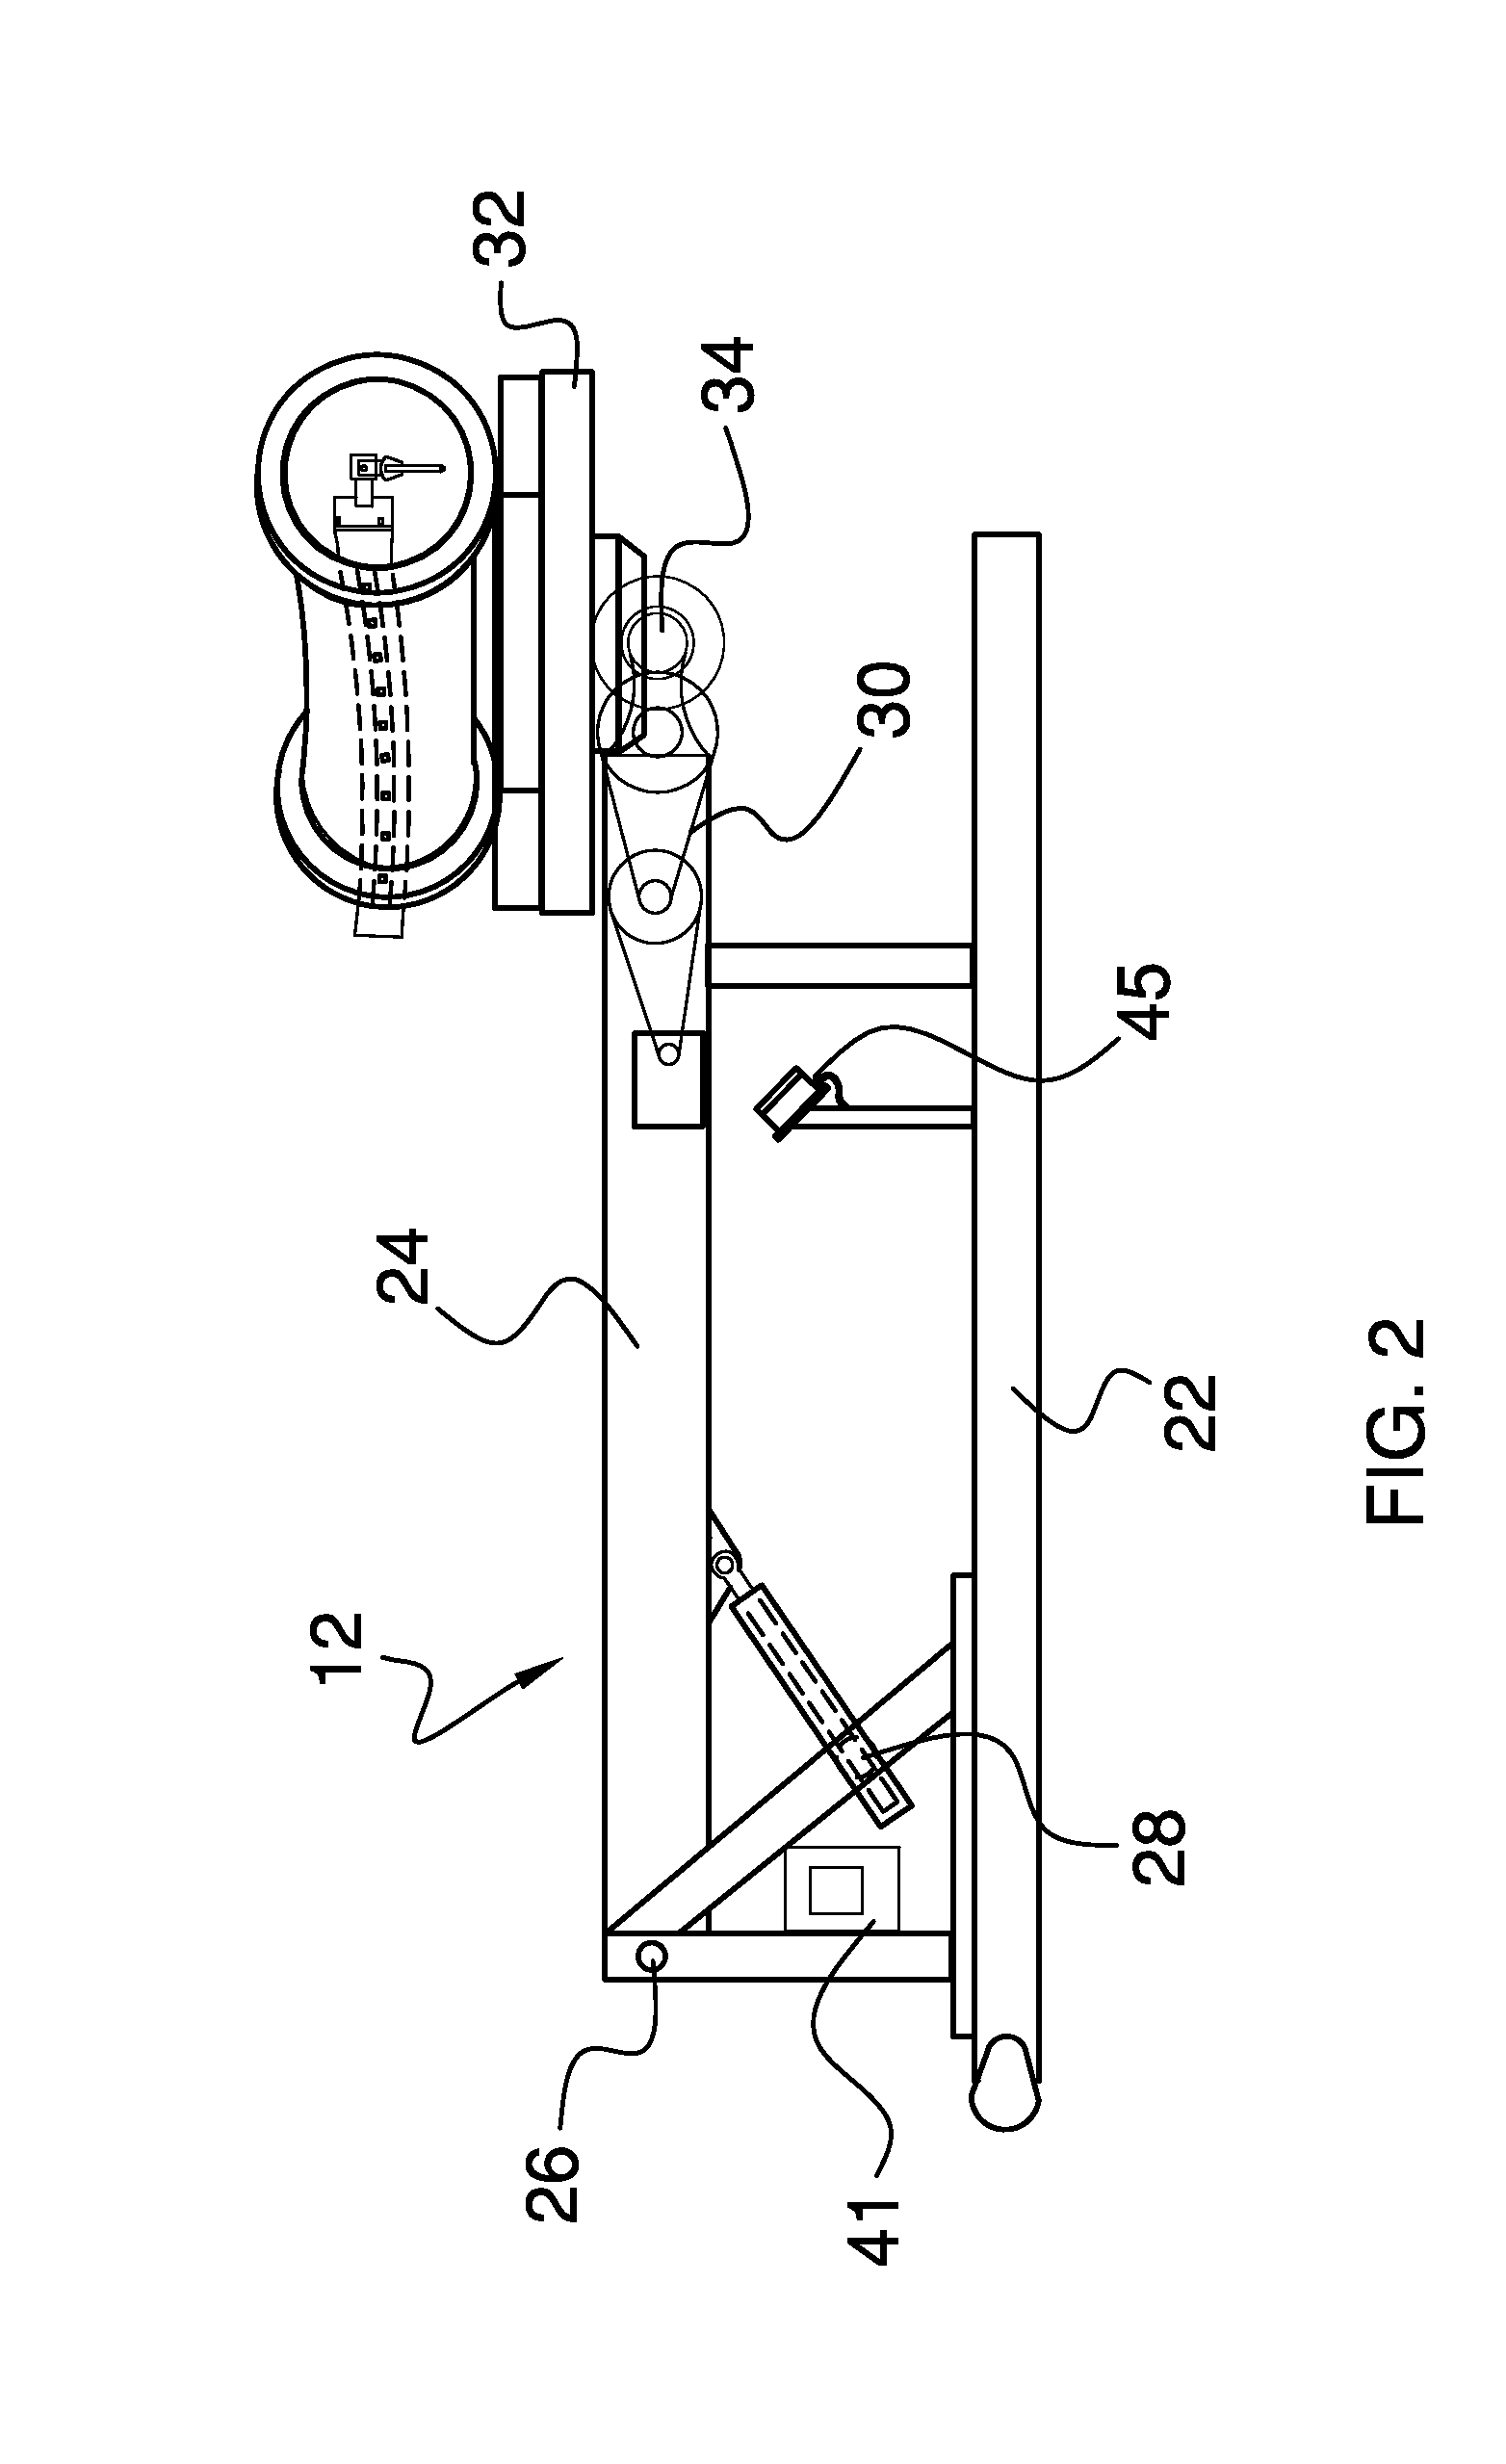 Method and apparatus for cladding an interior surface of a curved pipe